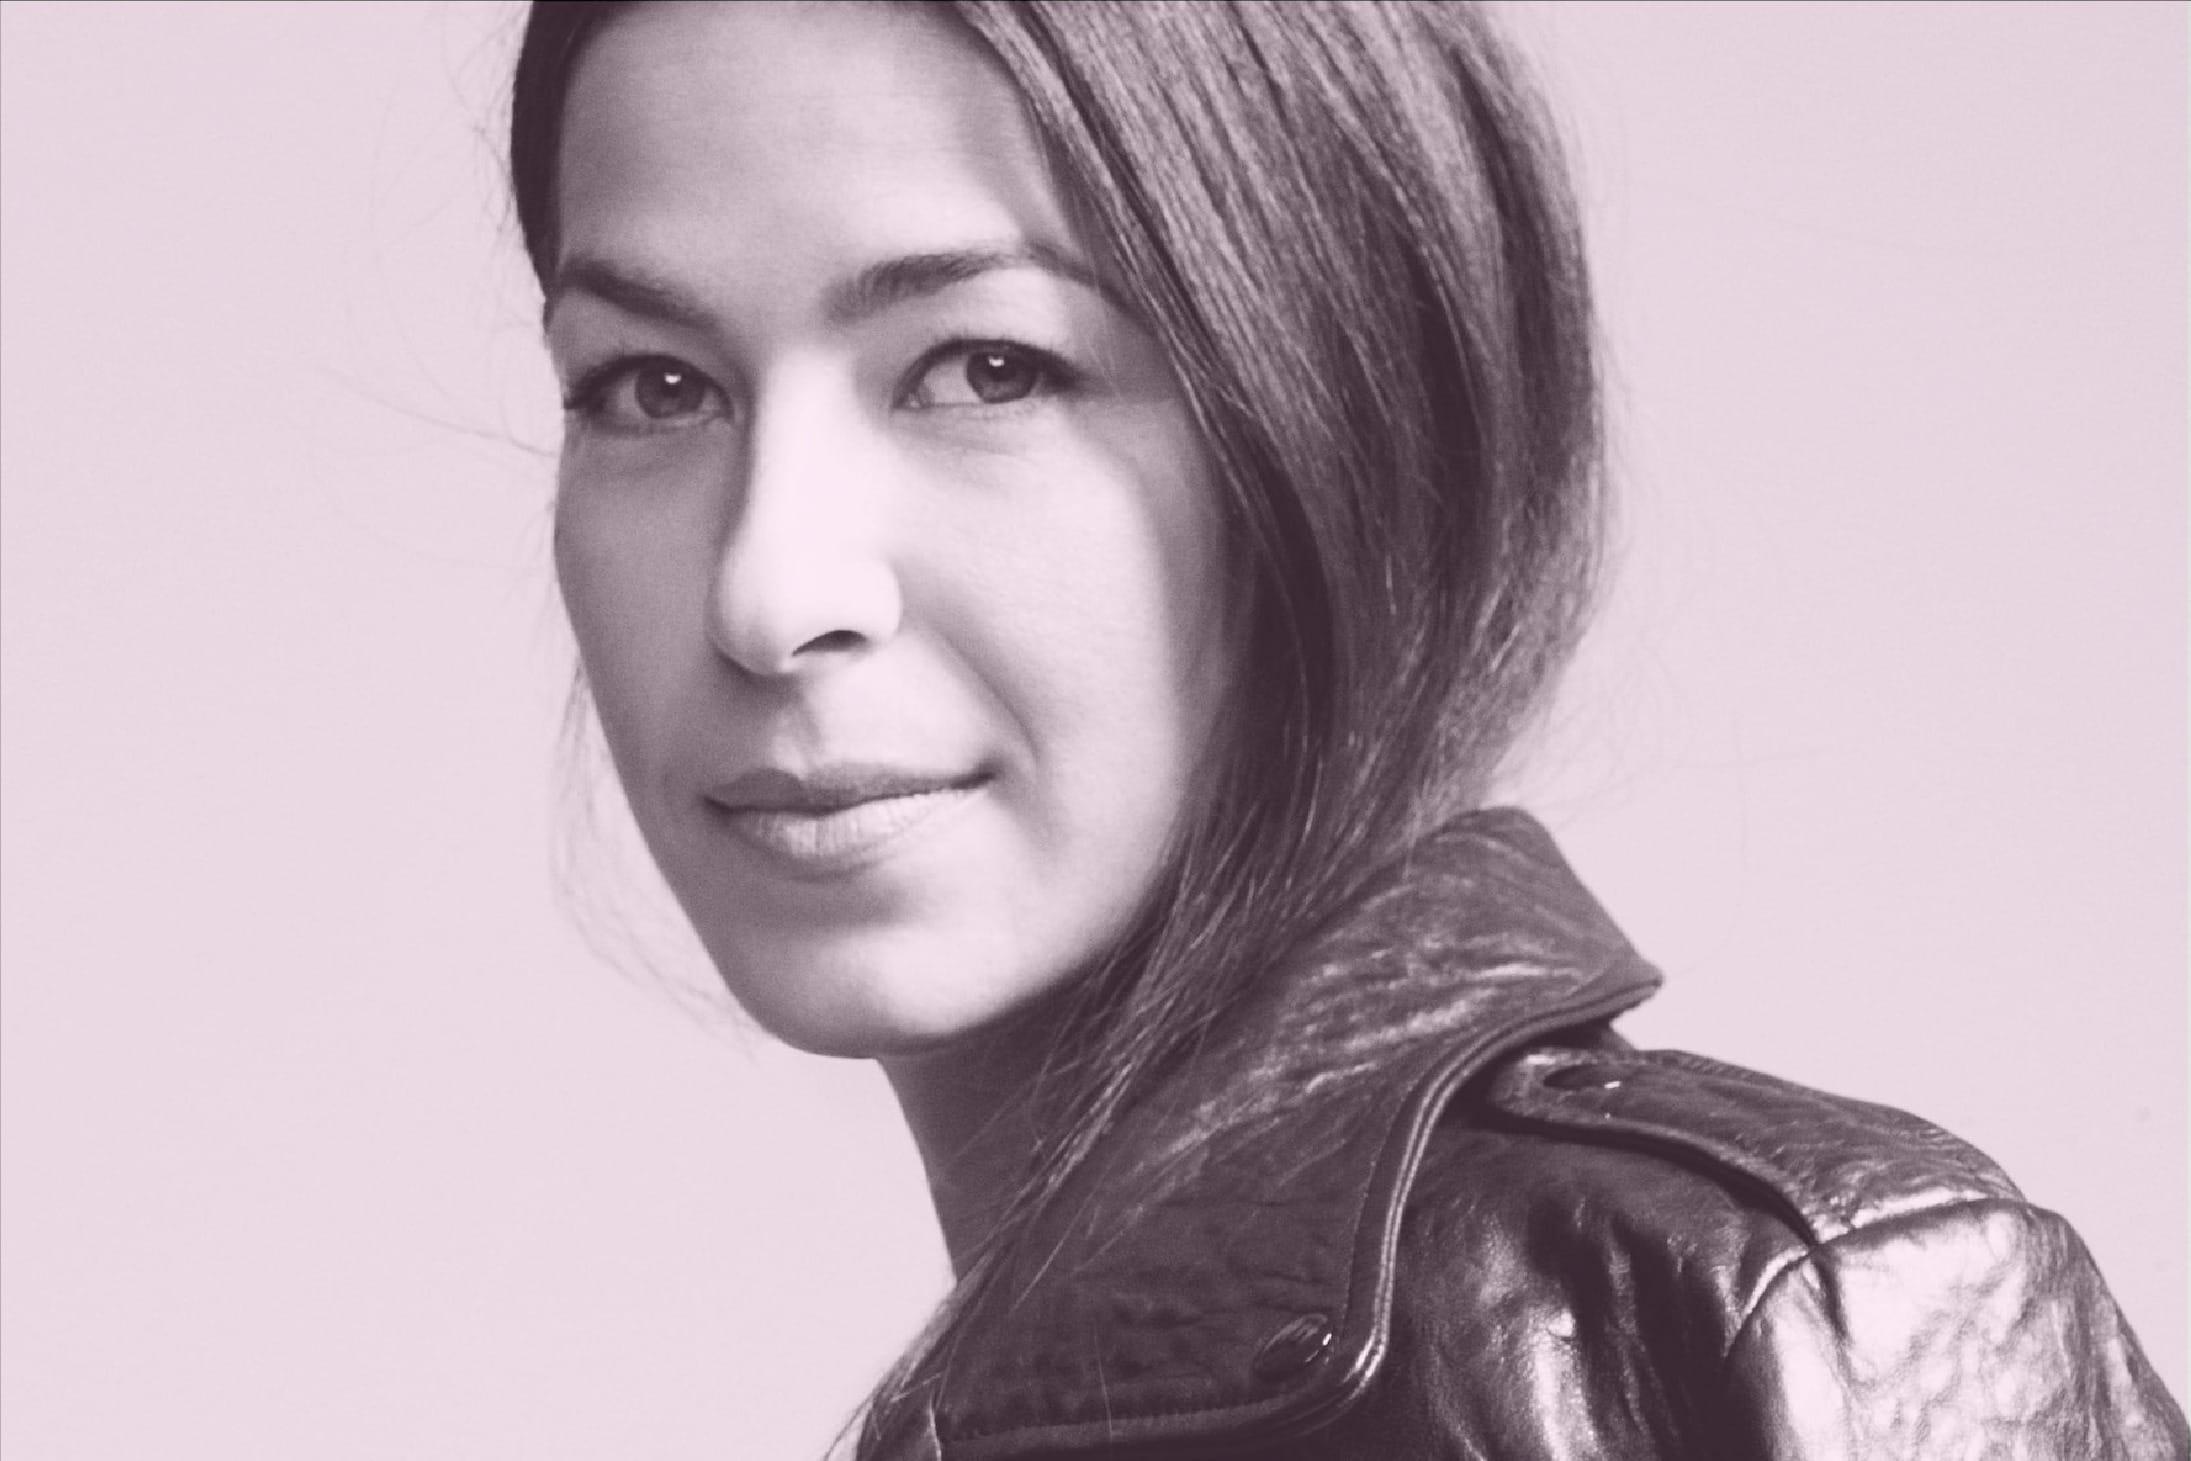 Rebecca Minkoff On How To Succeed Without Sacrificing Your Life